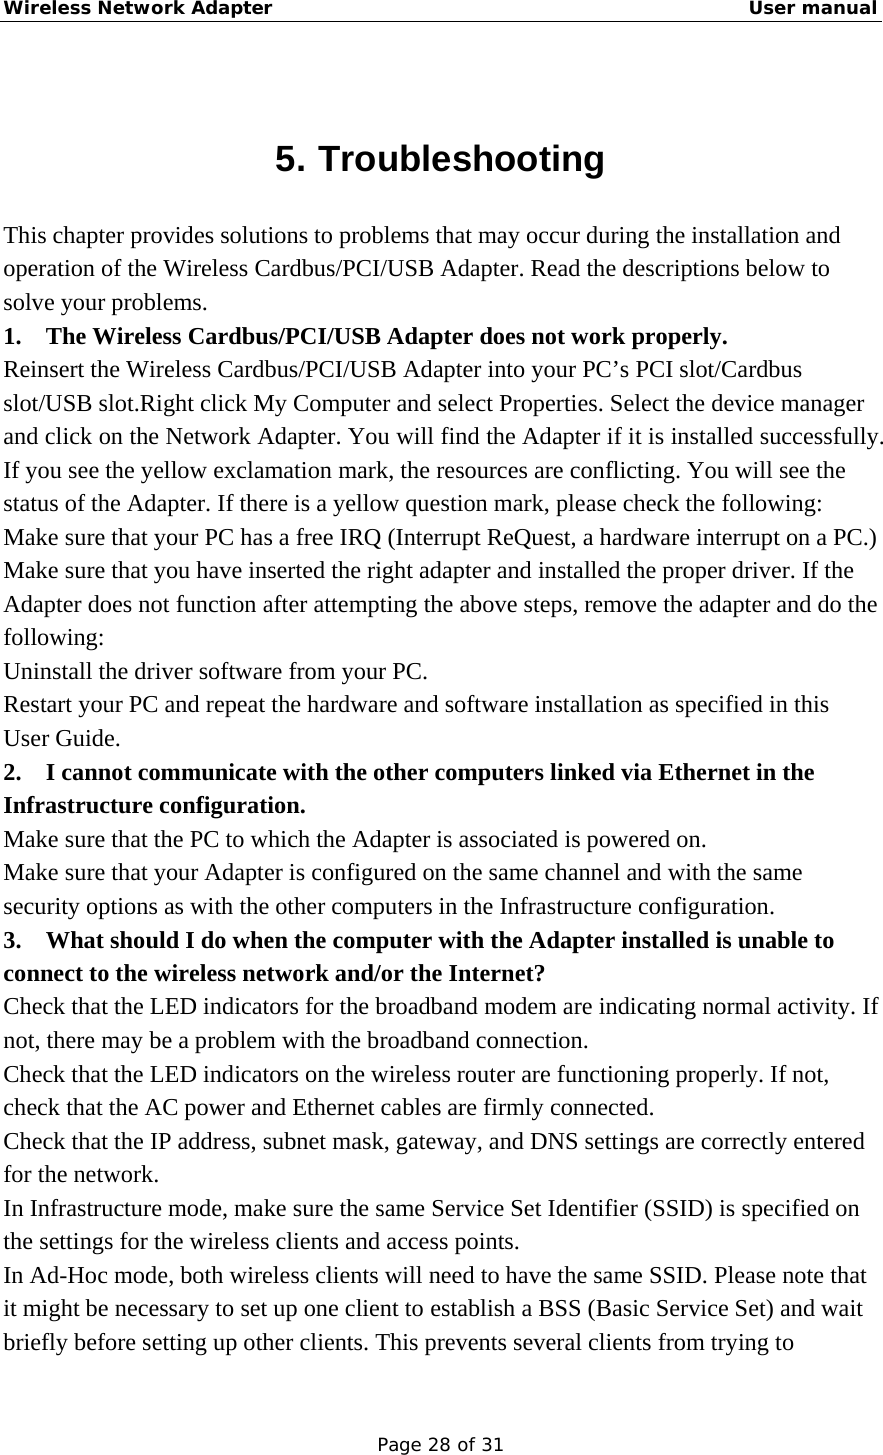 Wireless Network Adapter                                                    User manual Page 28 of 31  5. Troubleshooting This chapter provides solutions to problems that may occur during the installation and operation of the Wireless Cardbus/PCI/USB Adapter. Read the descriptions below to solve your problems.   1. The Wireless Cardbus/PCI/USB Adapter does not work properly. Reinsert the Wireless Cardbus/PCI/USB Adapter into your PC’s PCI slot/Cardbus slot/USB slot.Right click My Computer and select Properties. Select the device manager and click on the Network Adapter. You will find the Adapter if it is installed successfully. If you see the yellow exclamation mark, the resources are conflicting. You will see the status of the Adapter. If there is a yellow question mark, please check the following: Make sure that your PC has a free IRQ (Interrupt ReQuest, a hardware interrupt on a PC.) Make sure that you have inserted the right adapter and installed the proper driver. If the Adapter does not function after attempting the above steps, remove the adapter and do the following: Uninstall the driver software from your PC. Restart your PC and repeat the hardware and software installation as specified in this User Guide. 2.  I cannot communicate with the other computers linked via Ethernet in the Infrastructure configuration. Make sure that the PC to which the Adapter is associated is powered on. Make sure that your Adapter is configured on the same channel and with the same security options as with the other computers in the Infrastructure configuration. 3.  What should I do when the computer with the Adapter installed is unable to connect to the wireless network and/or the Internet? Check that the LED indicators for the broadband modem are indicating normal activity. If not, there may be a problem with the broadband connection. Check that the LED indicators on the wireless router are functioning properly. If not, check that the AC power and Ethernet cables are firmly connected. Check that the IP address, subnet mask, gateway, and DNS settings are correctly entered for the network. In Infrastructure mode, make sure the same Service Set Identifier (SSID) is specified on the settings for the wireless clients and access points.   In Ad-Hoc mode, both wireless clients will need to have the same SSID. Please note that it might be necessary to set up one client to establish a BSS (Basic Service Set) and wait briefly before setting up other clients. This prevents several clients from trying to 